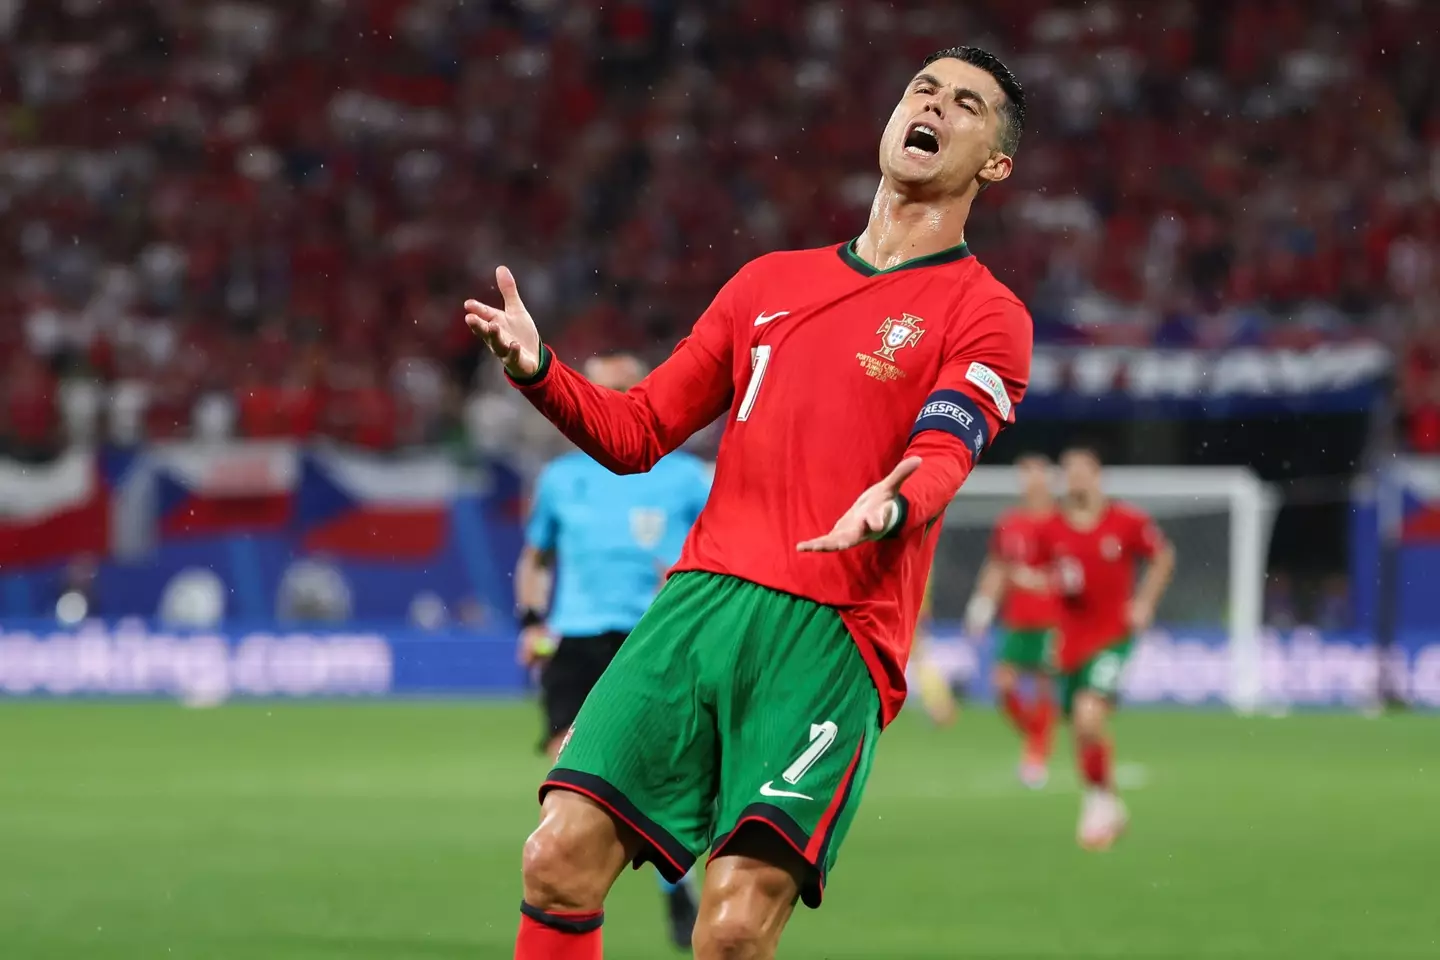 Ronaldo struggled in front of goal against the Czech Republic (Getty)